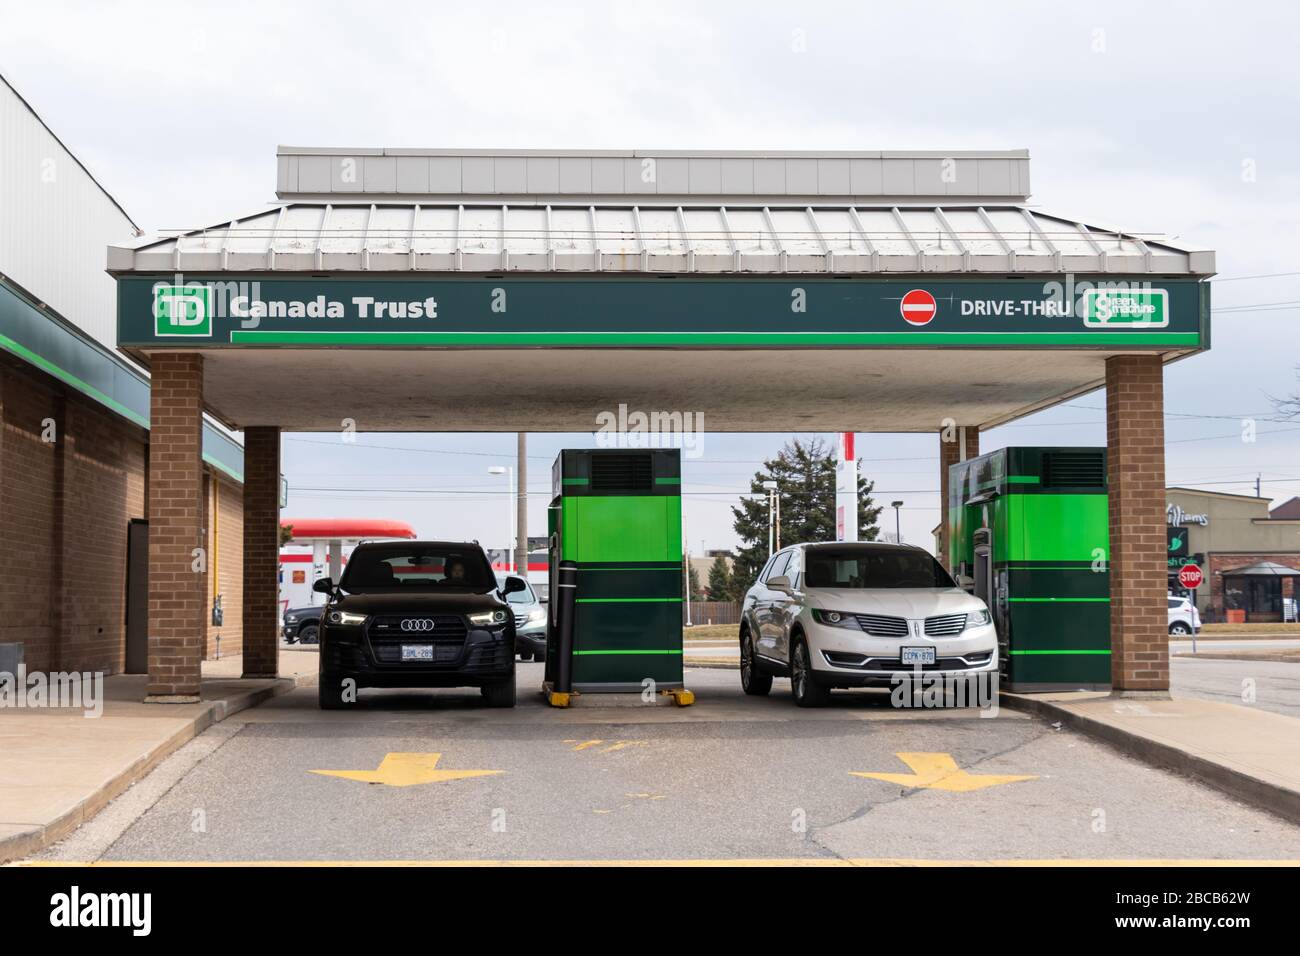 Cars stopped at a drive-thru ATM at TD Canada Trust branch in a city. Stock Photo